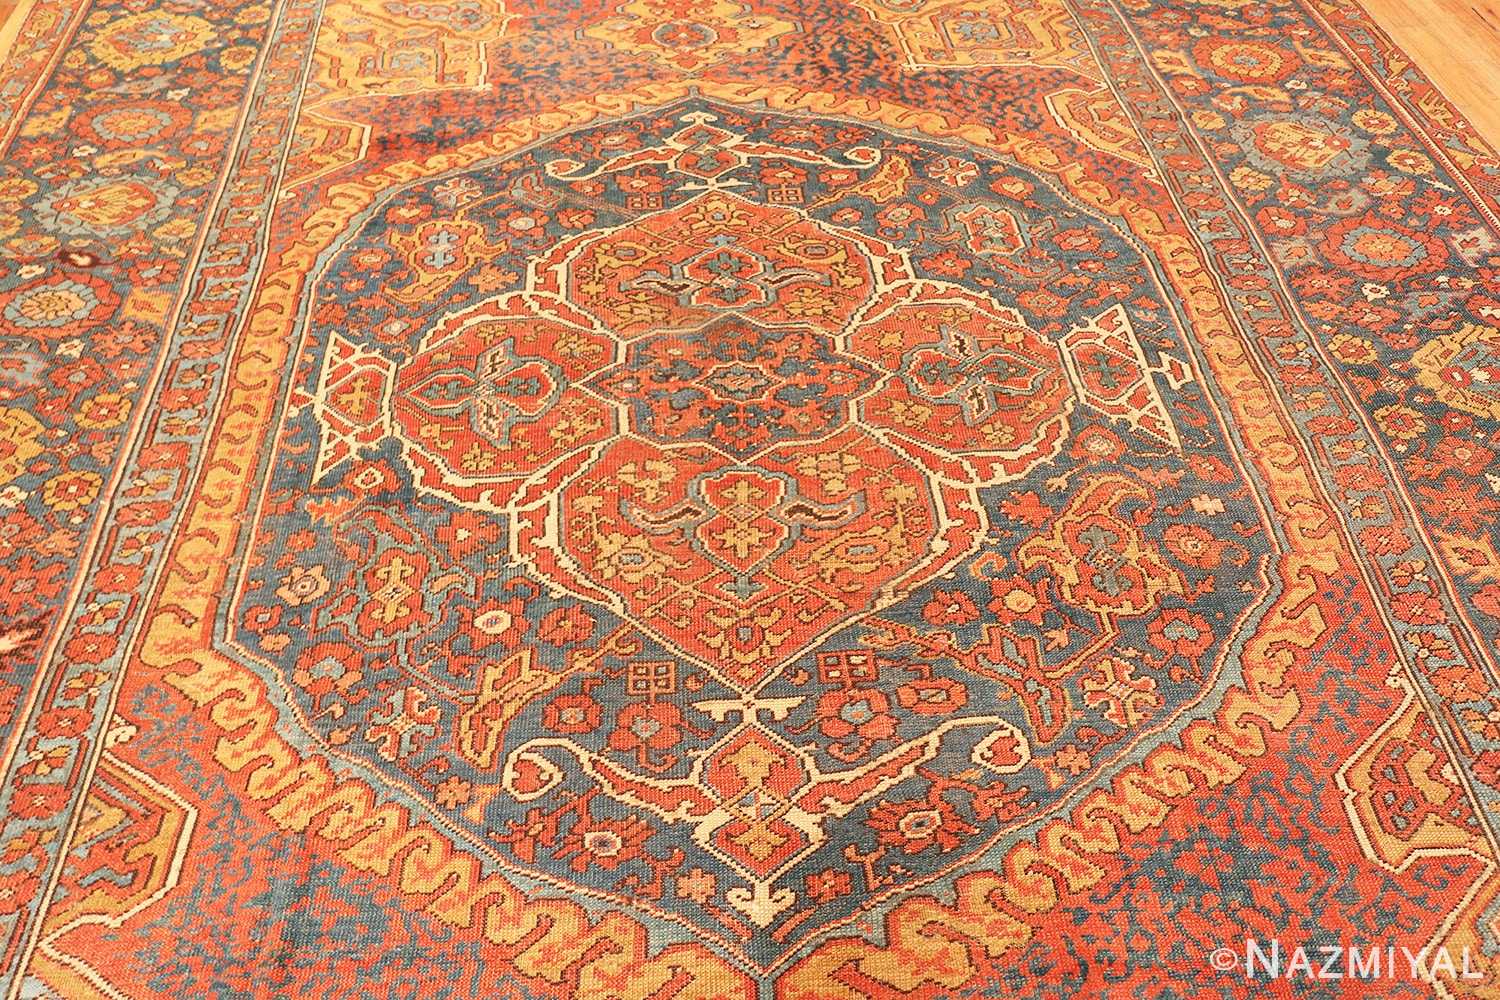 Design Close Up Of Antique 17 Century Turkish Smyrna Rug 70267 by Nazmiyal Antique Rugs in NYC